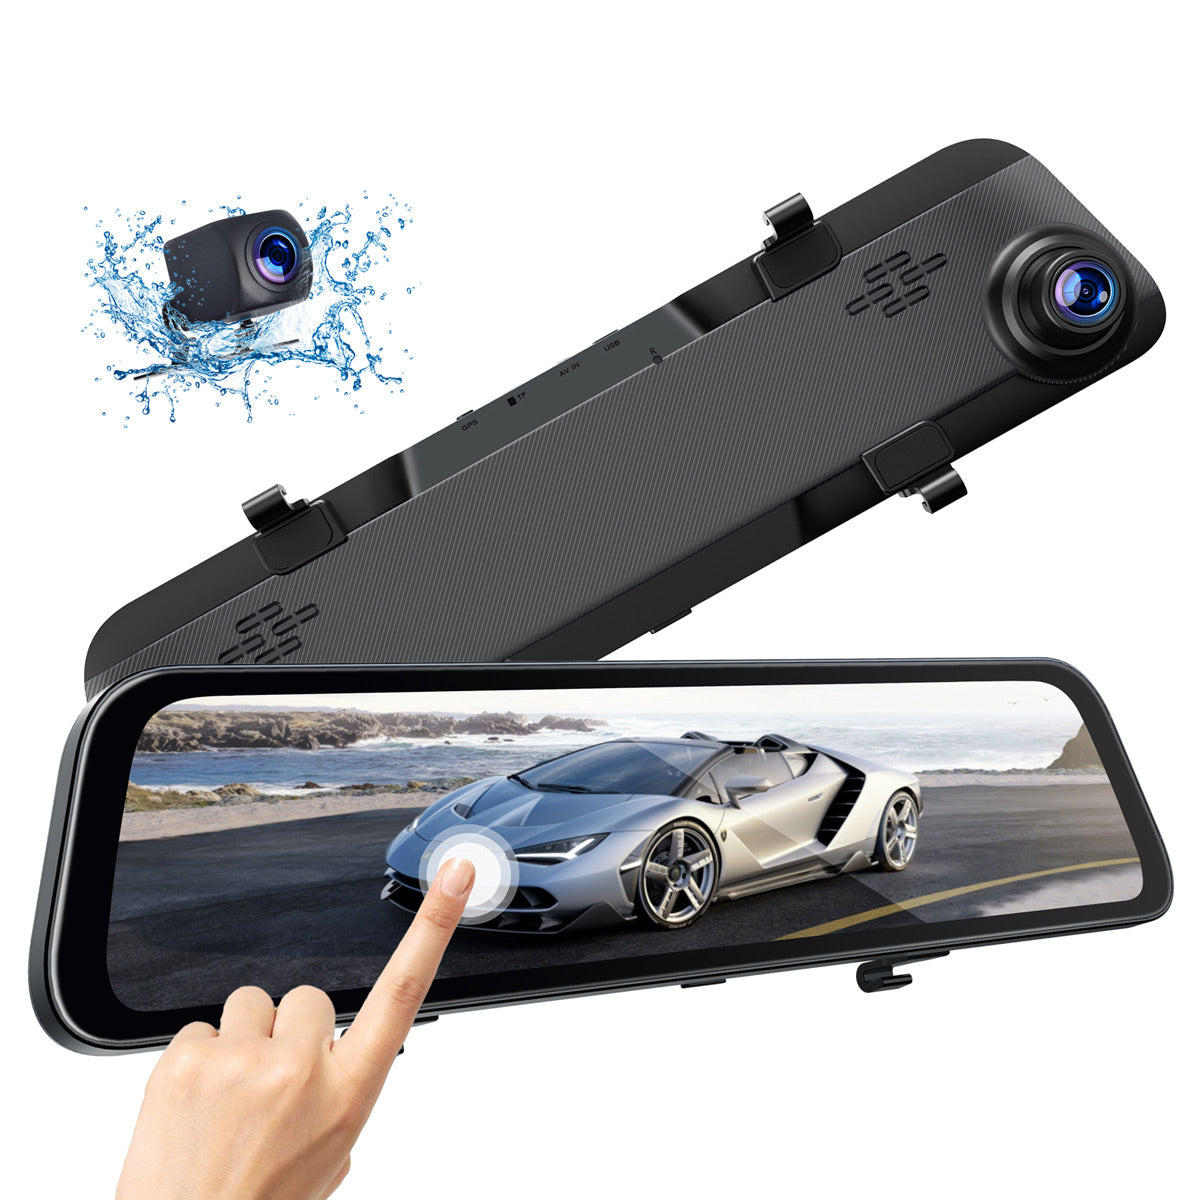 Campark CE70 2.5K 12" Front and Rear Mirror Dash Cam with Voice Control（Out of stock in USA）